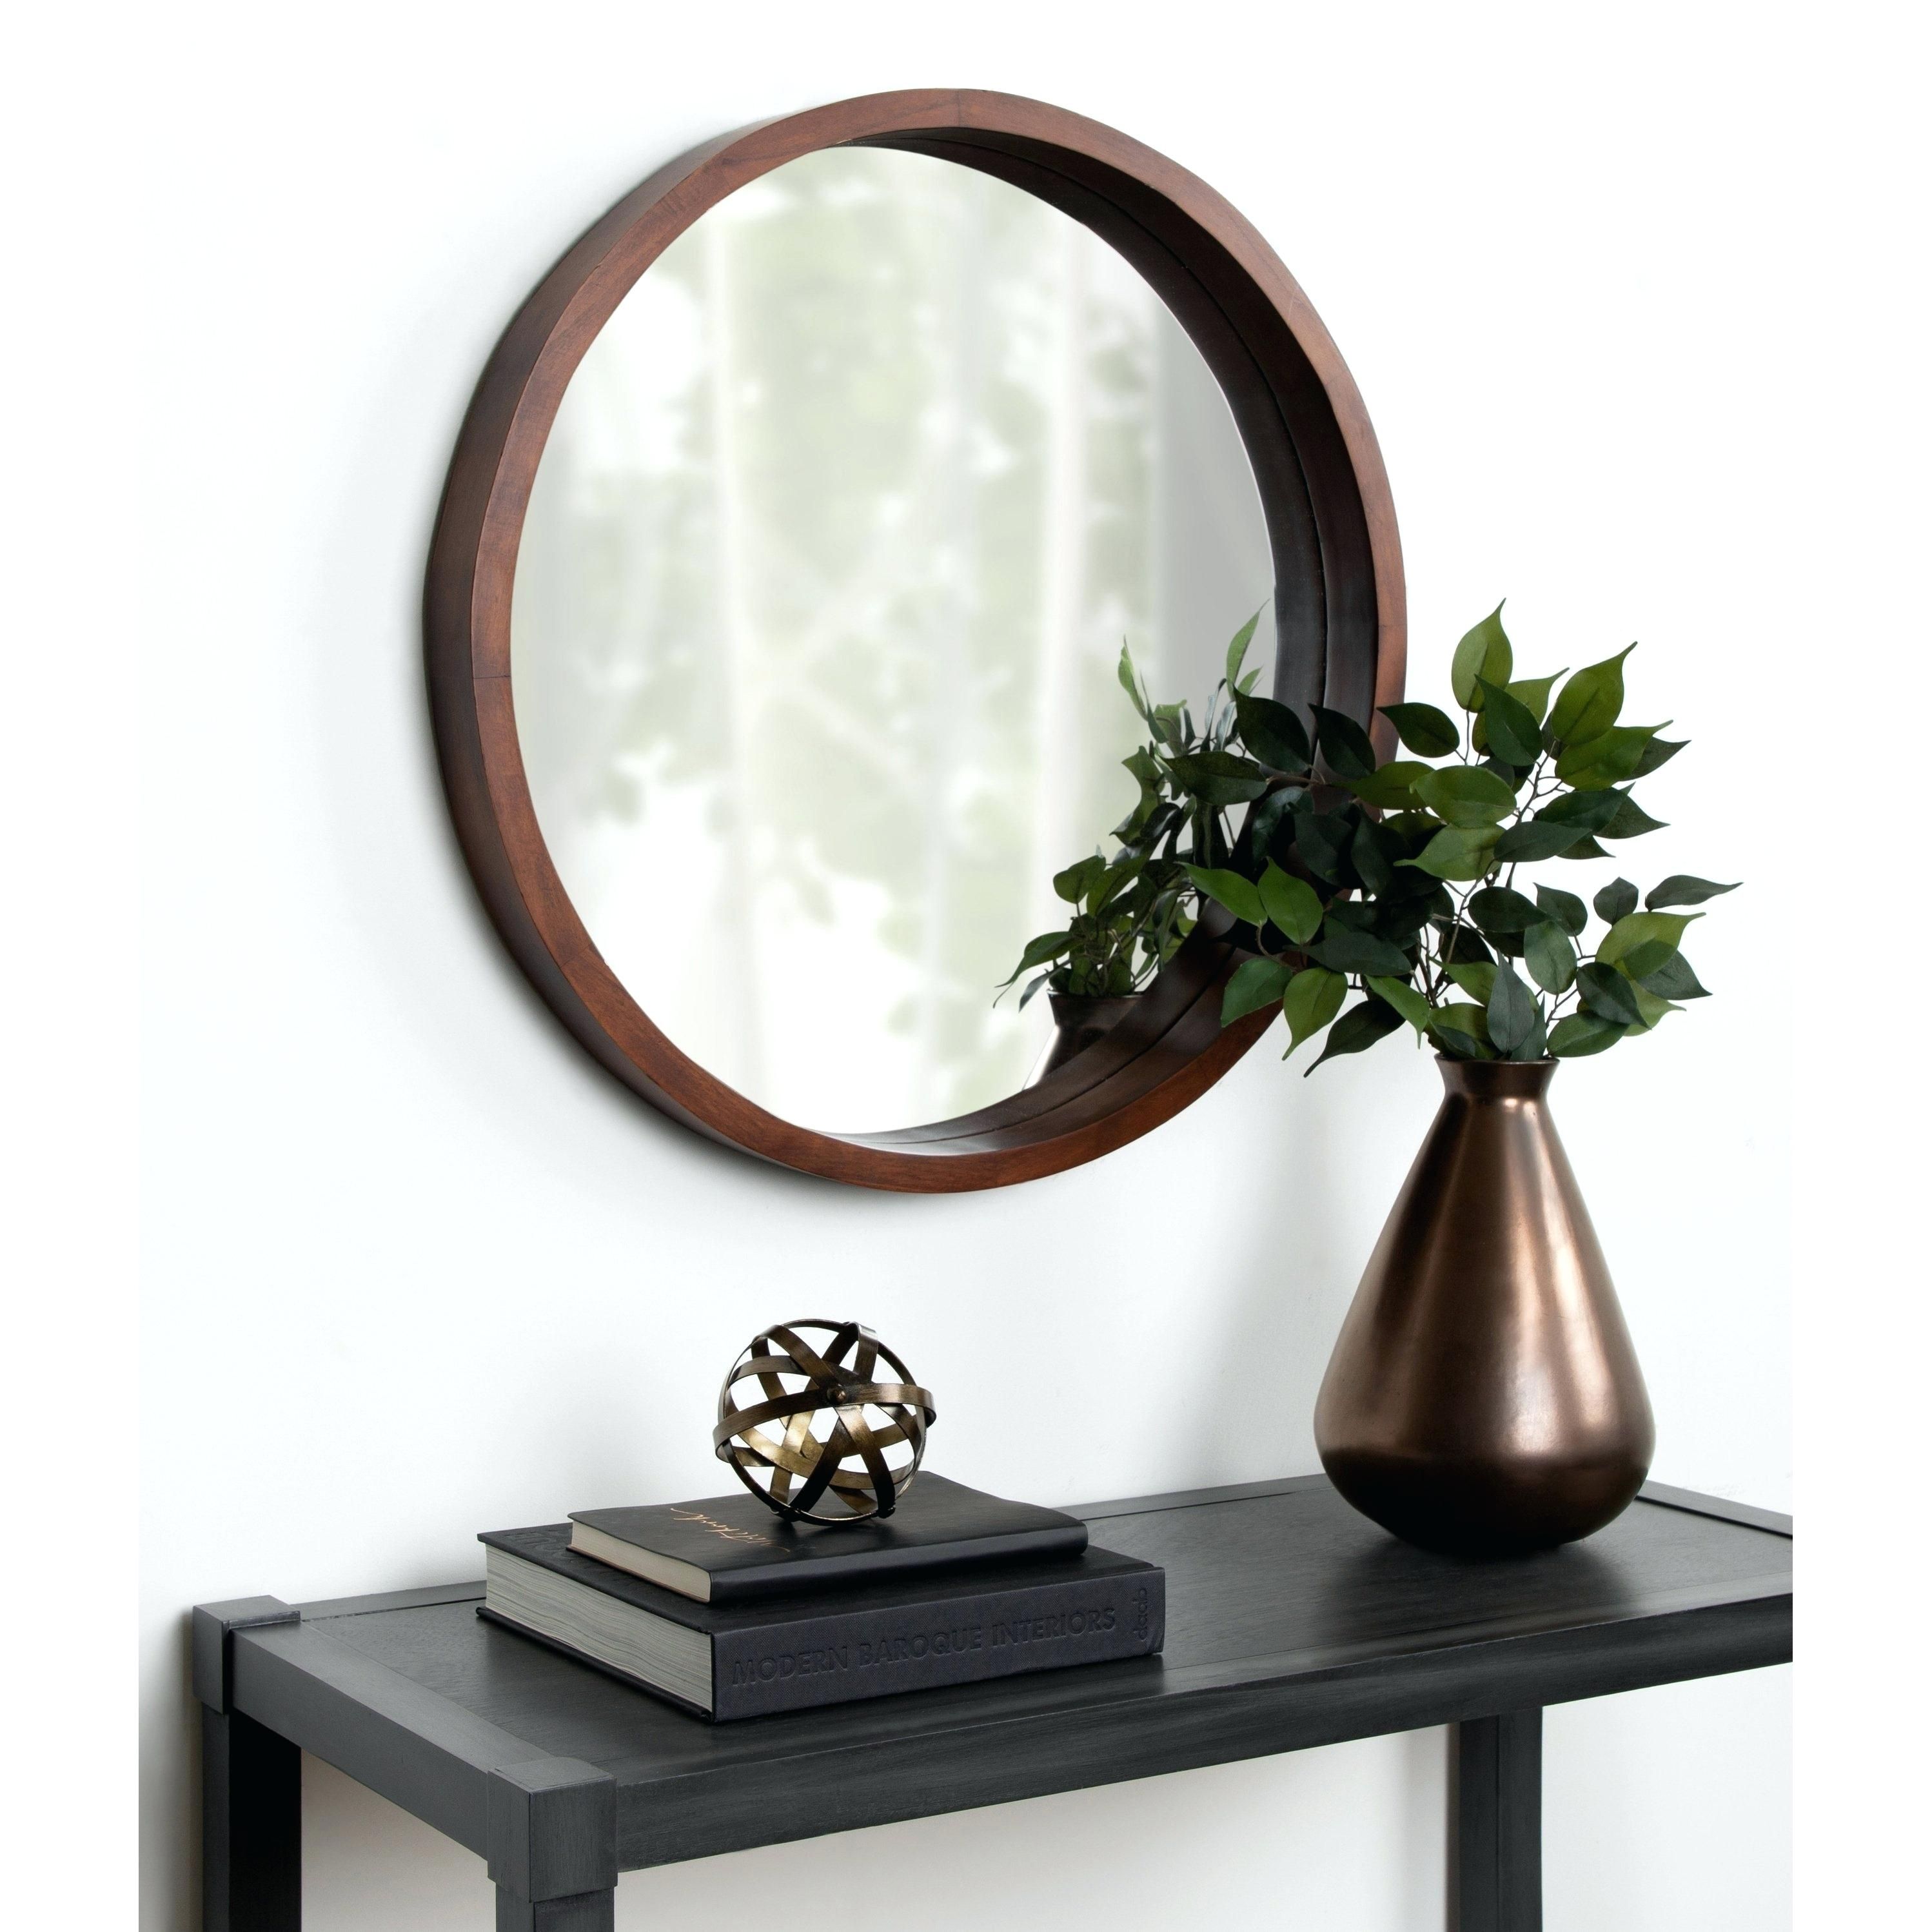 Wood Metal Mirror Big Floor As Well Stand Wall Mirrors Cheap Pertaining To Round Galvanized Metallic Wall Mirrors (View 27 of 30)